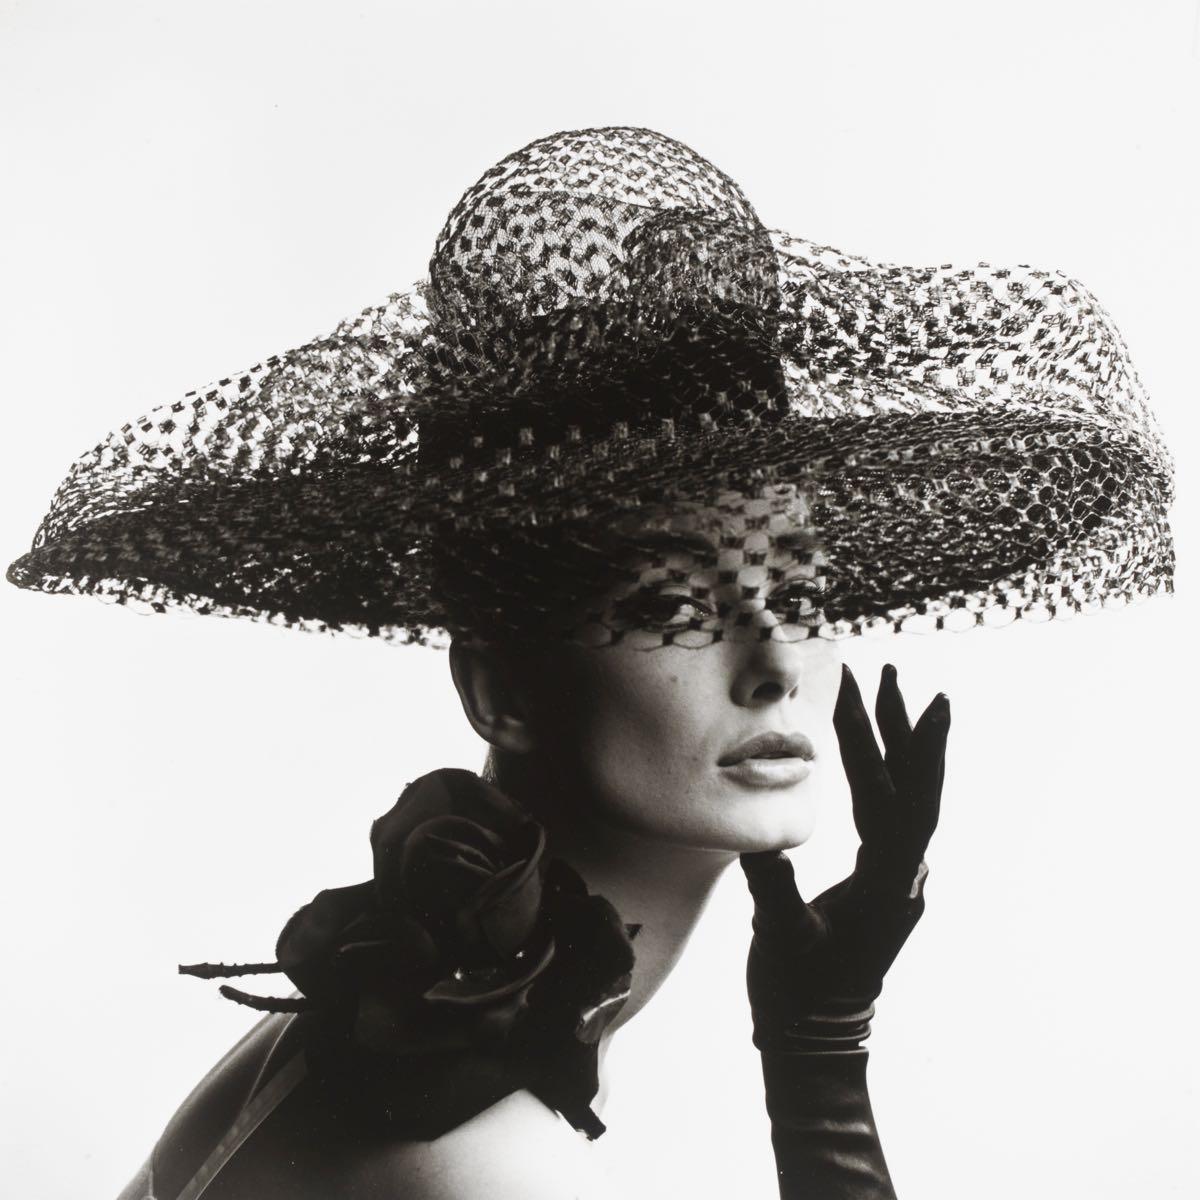 Portrait Photograph John French - Tania Mallet In A Madame Paulette - Chapeau 1963 - Victoria and Albert Museum